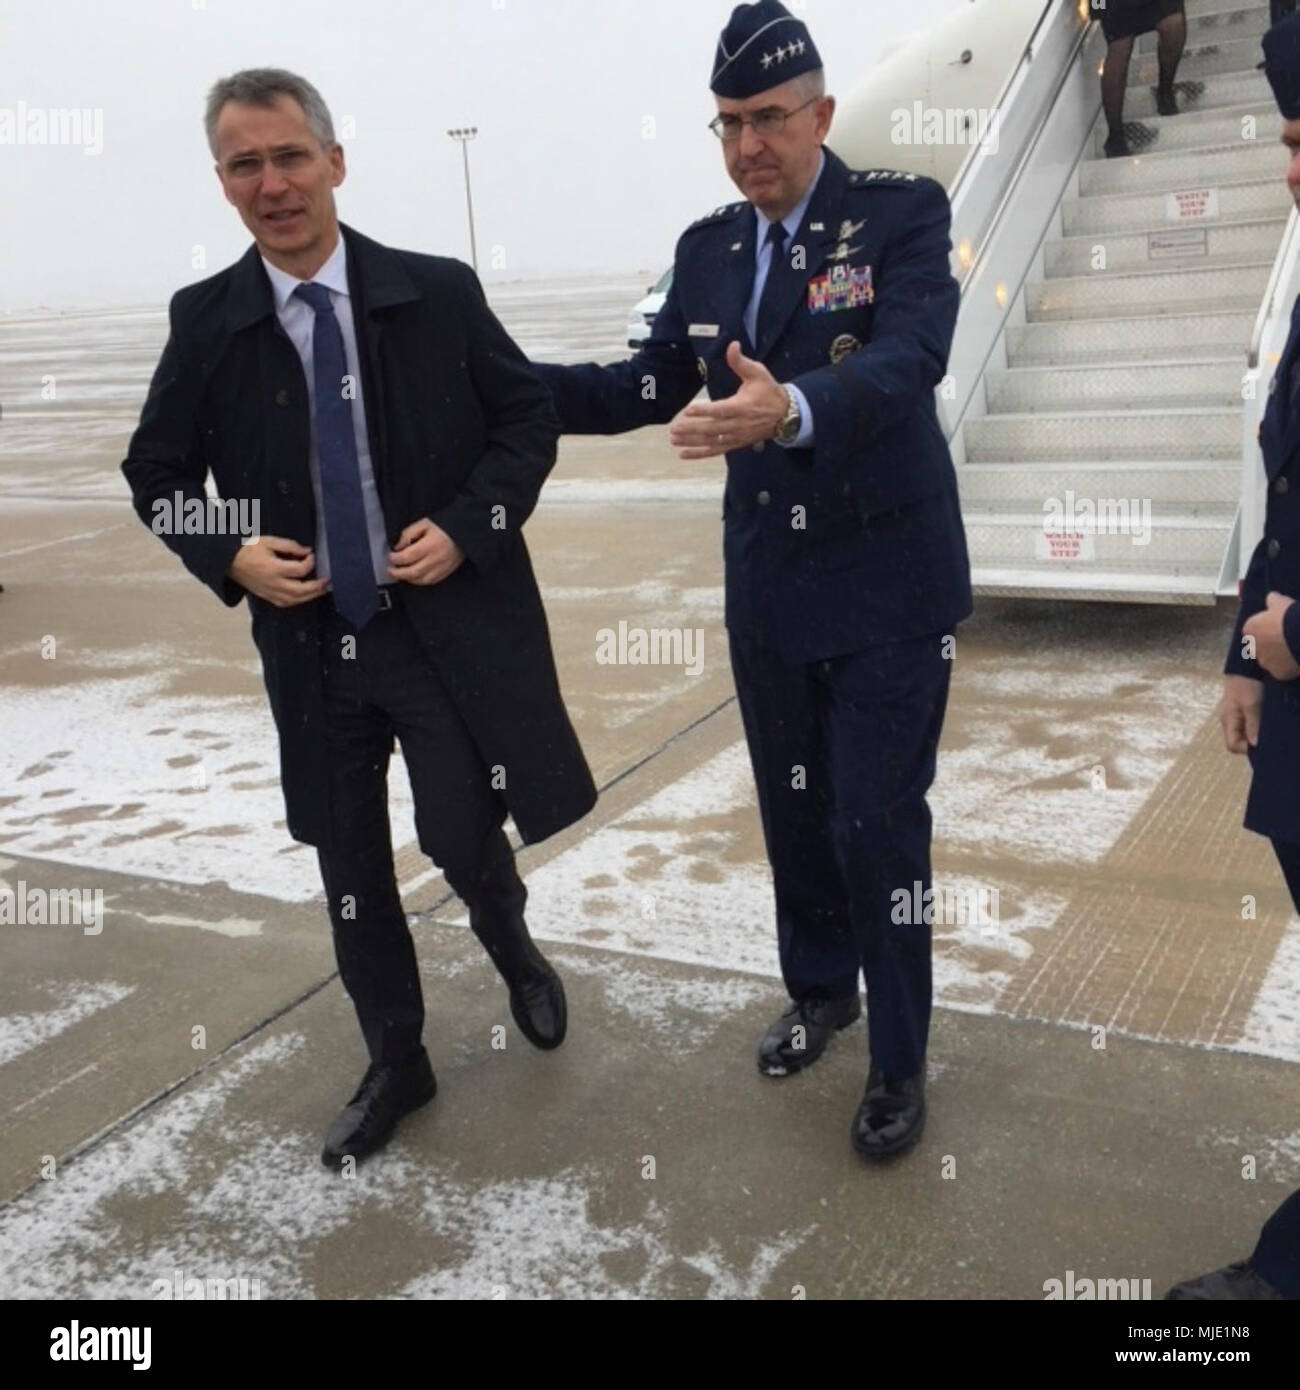 U.S. Air Force Gen. John Hyten, commander of U.S. Strategic Command (USSTRATCOM), welcomes NATO Secretary General Jens Stoltenberg to Omaha, Neb., April 6, 2018. During his visit to USSTRATCOM, Stoltenberg toured the command’s global operations center and participated in discussions with Hyten, other senior leaders and subject matter experts on the continuing U.S. commitment to supporting NATO and allies.  (USSTRATCOM Stock Photo